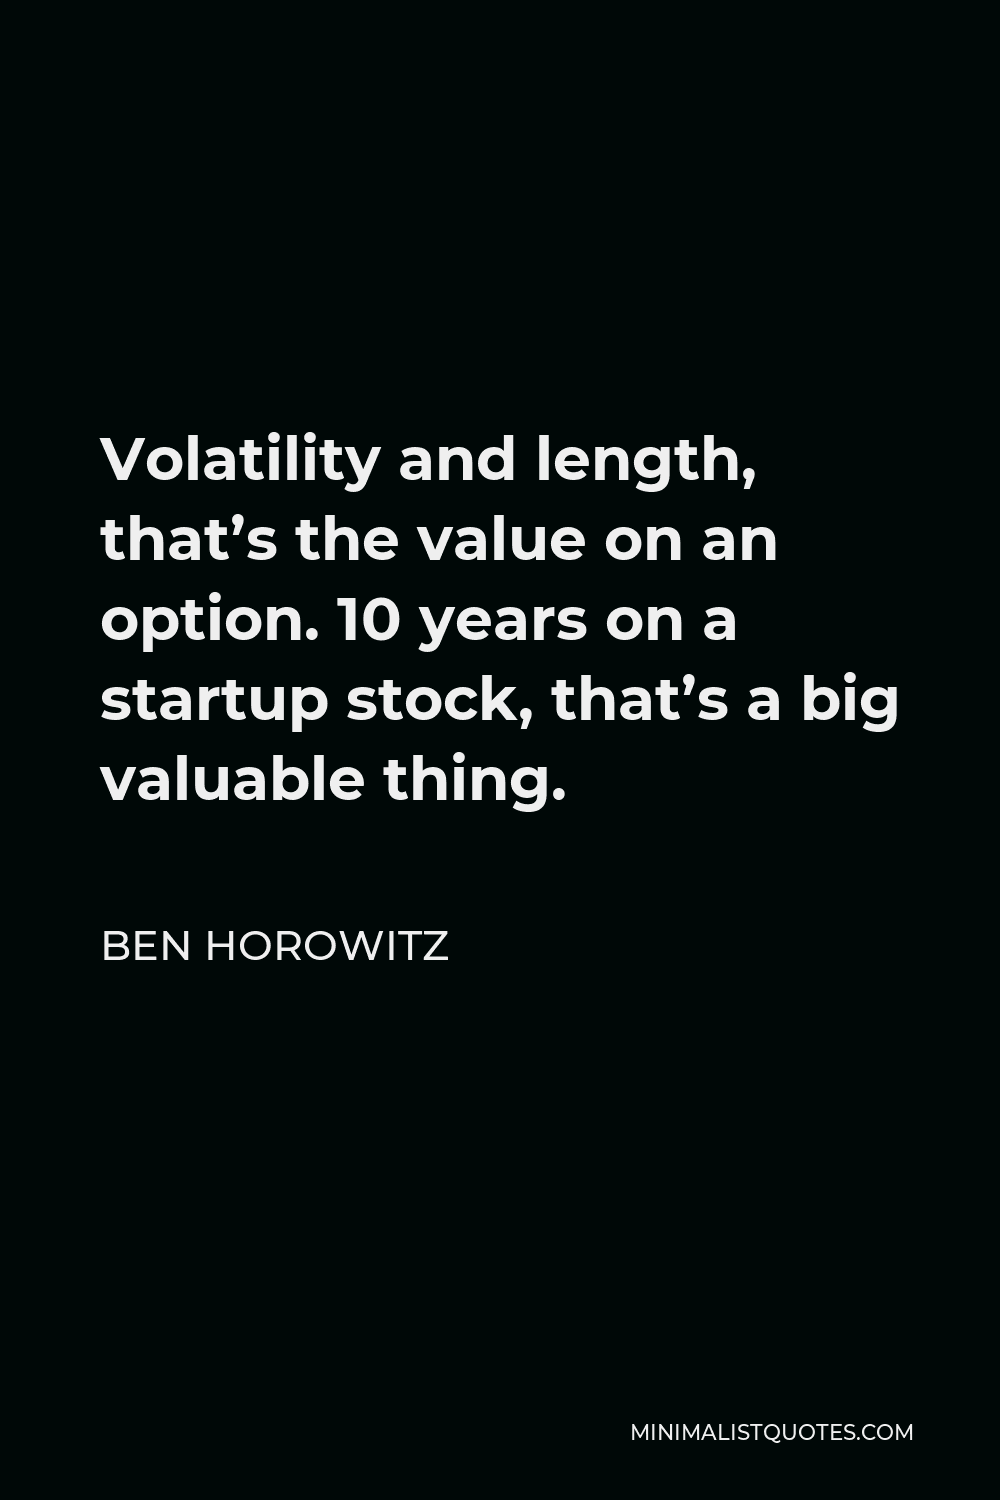 Ben Horowitz Quote - Volatility and length, that’s the value on an option. 10 years on a startup stock, that’s a big valuable thing.